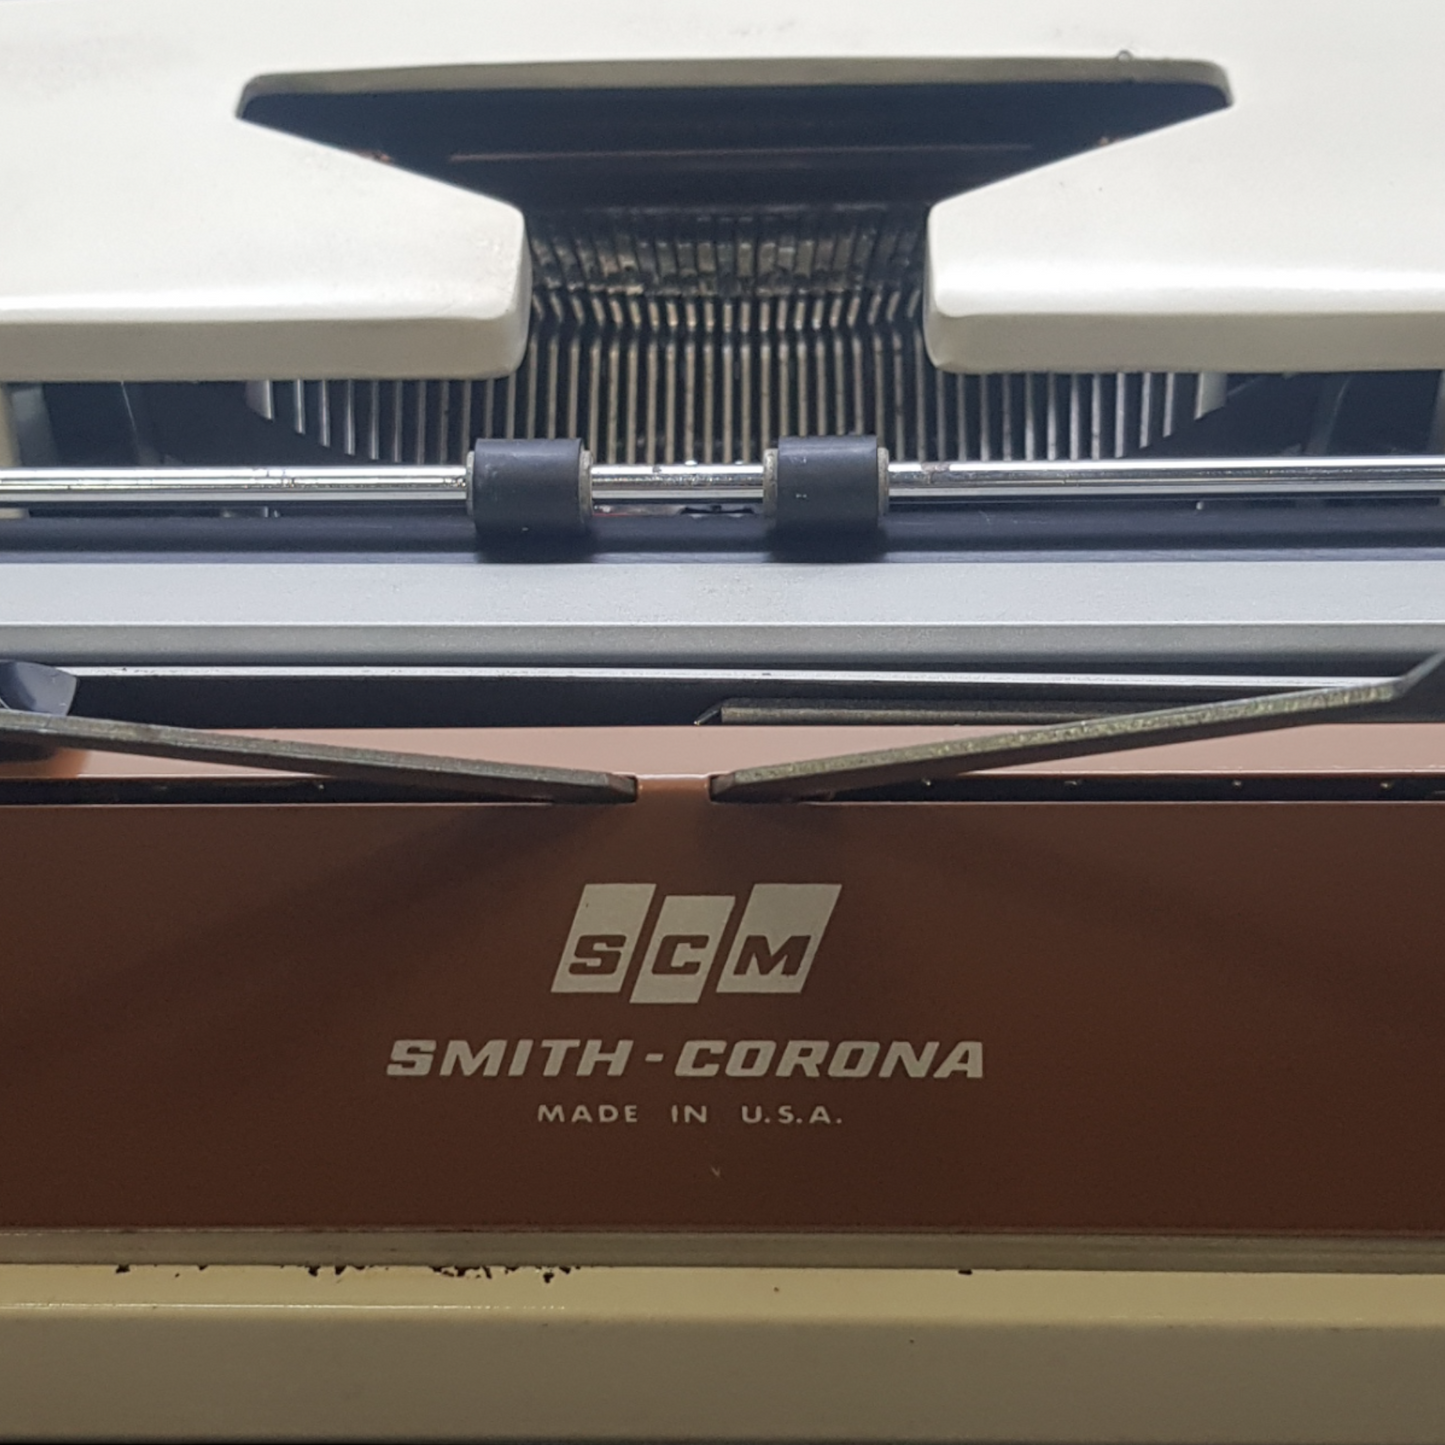 Image of SCM Smith Corona Classic Typewriter. A Big Portable typewriter. Made in the USA. Available from Universal Typewriter Company.